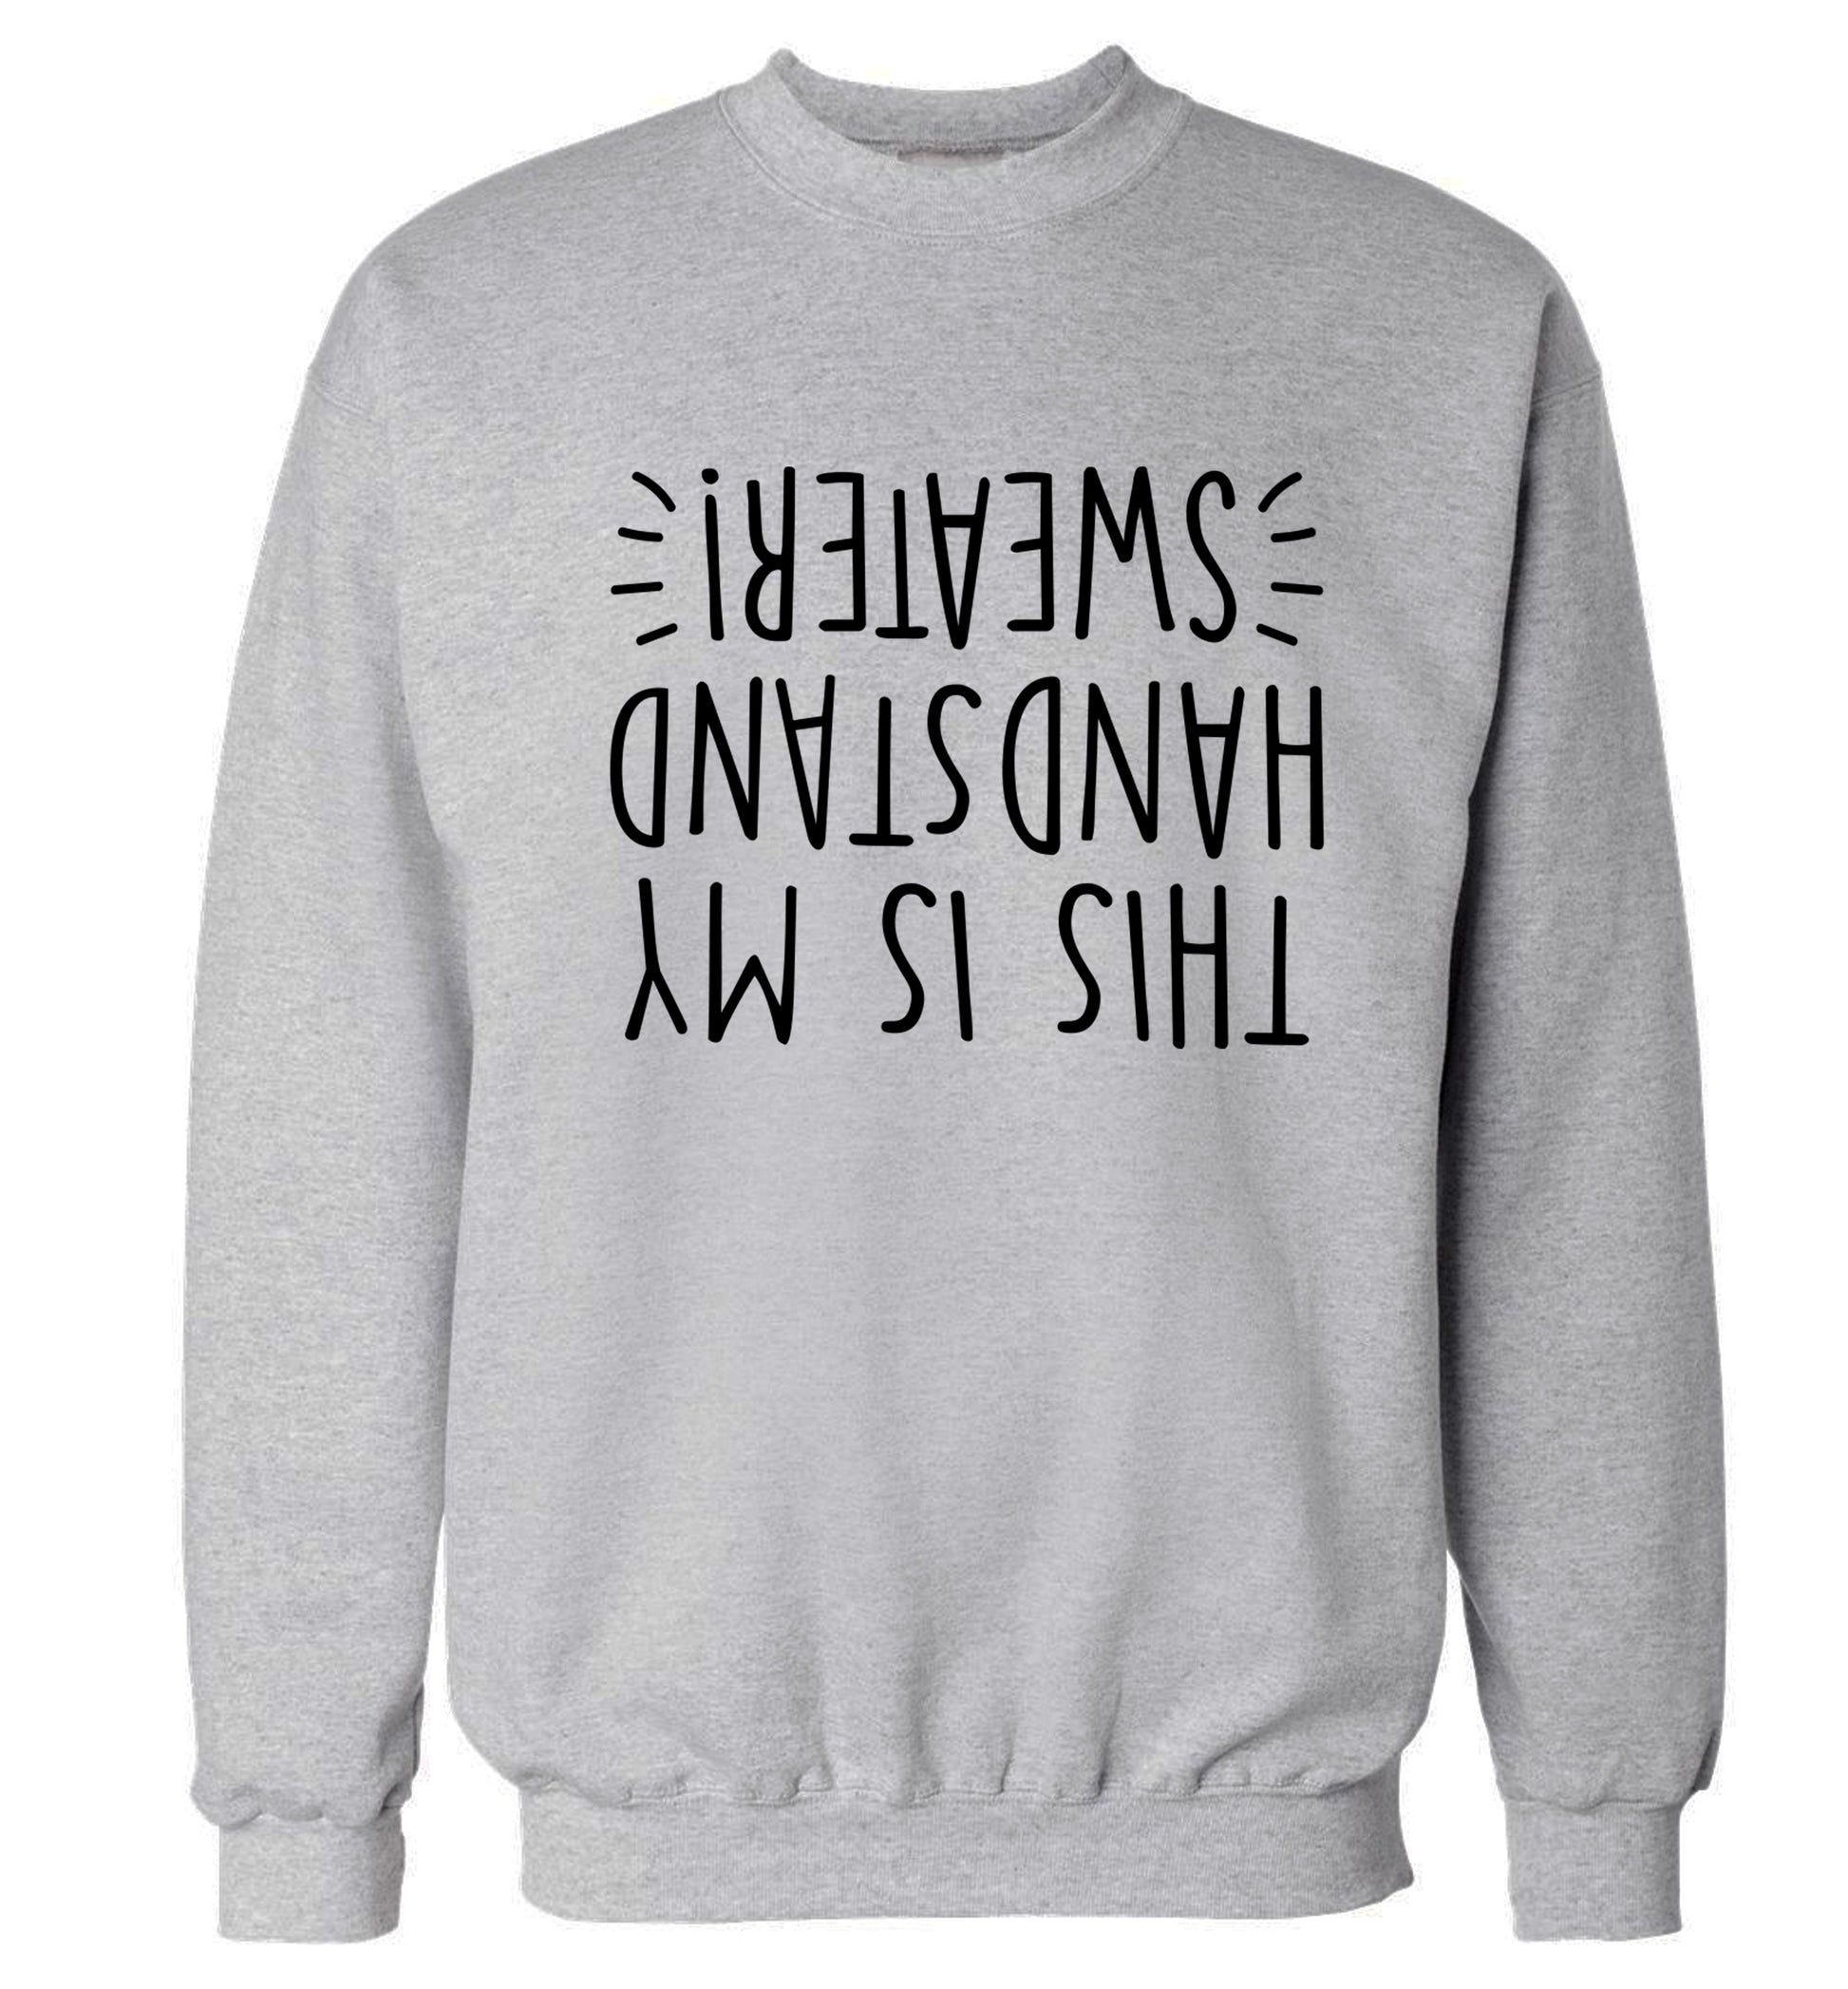 This is my handstand Adult's unisex grey Sweater 2XL